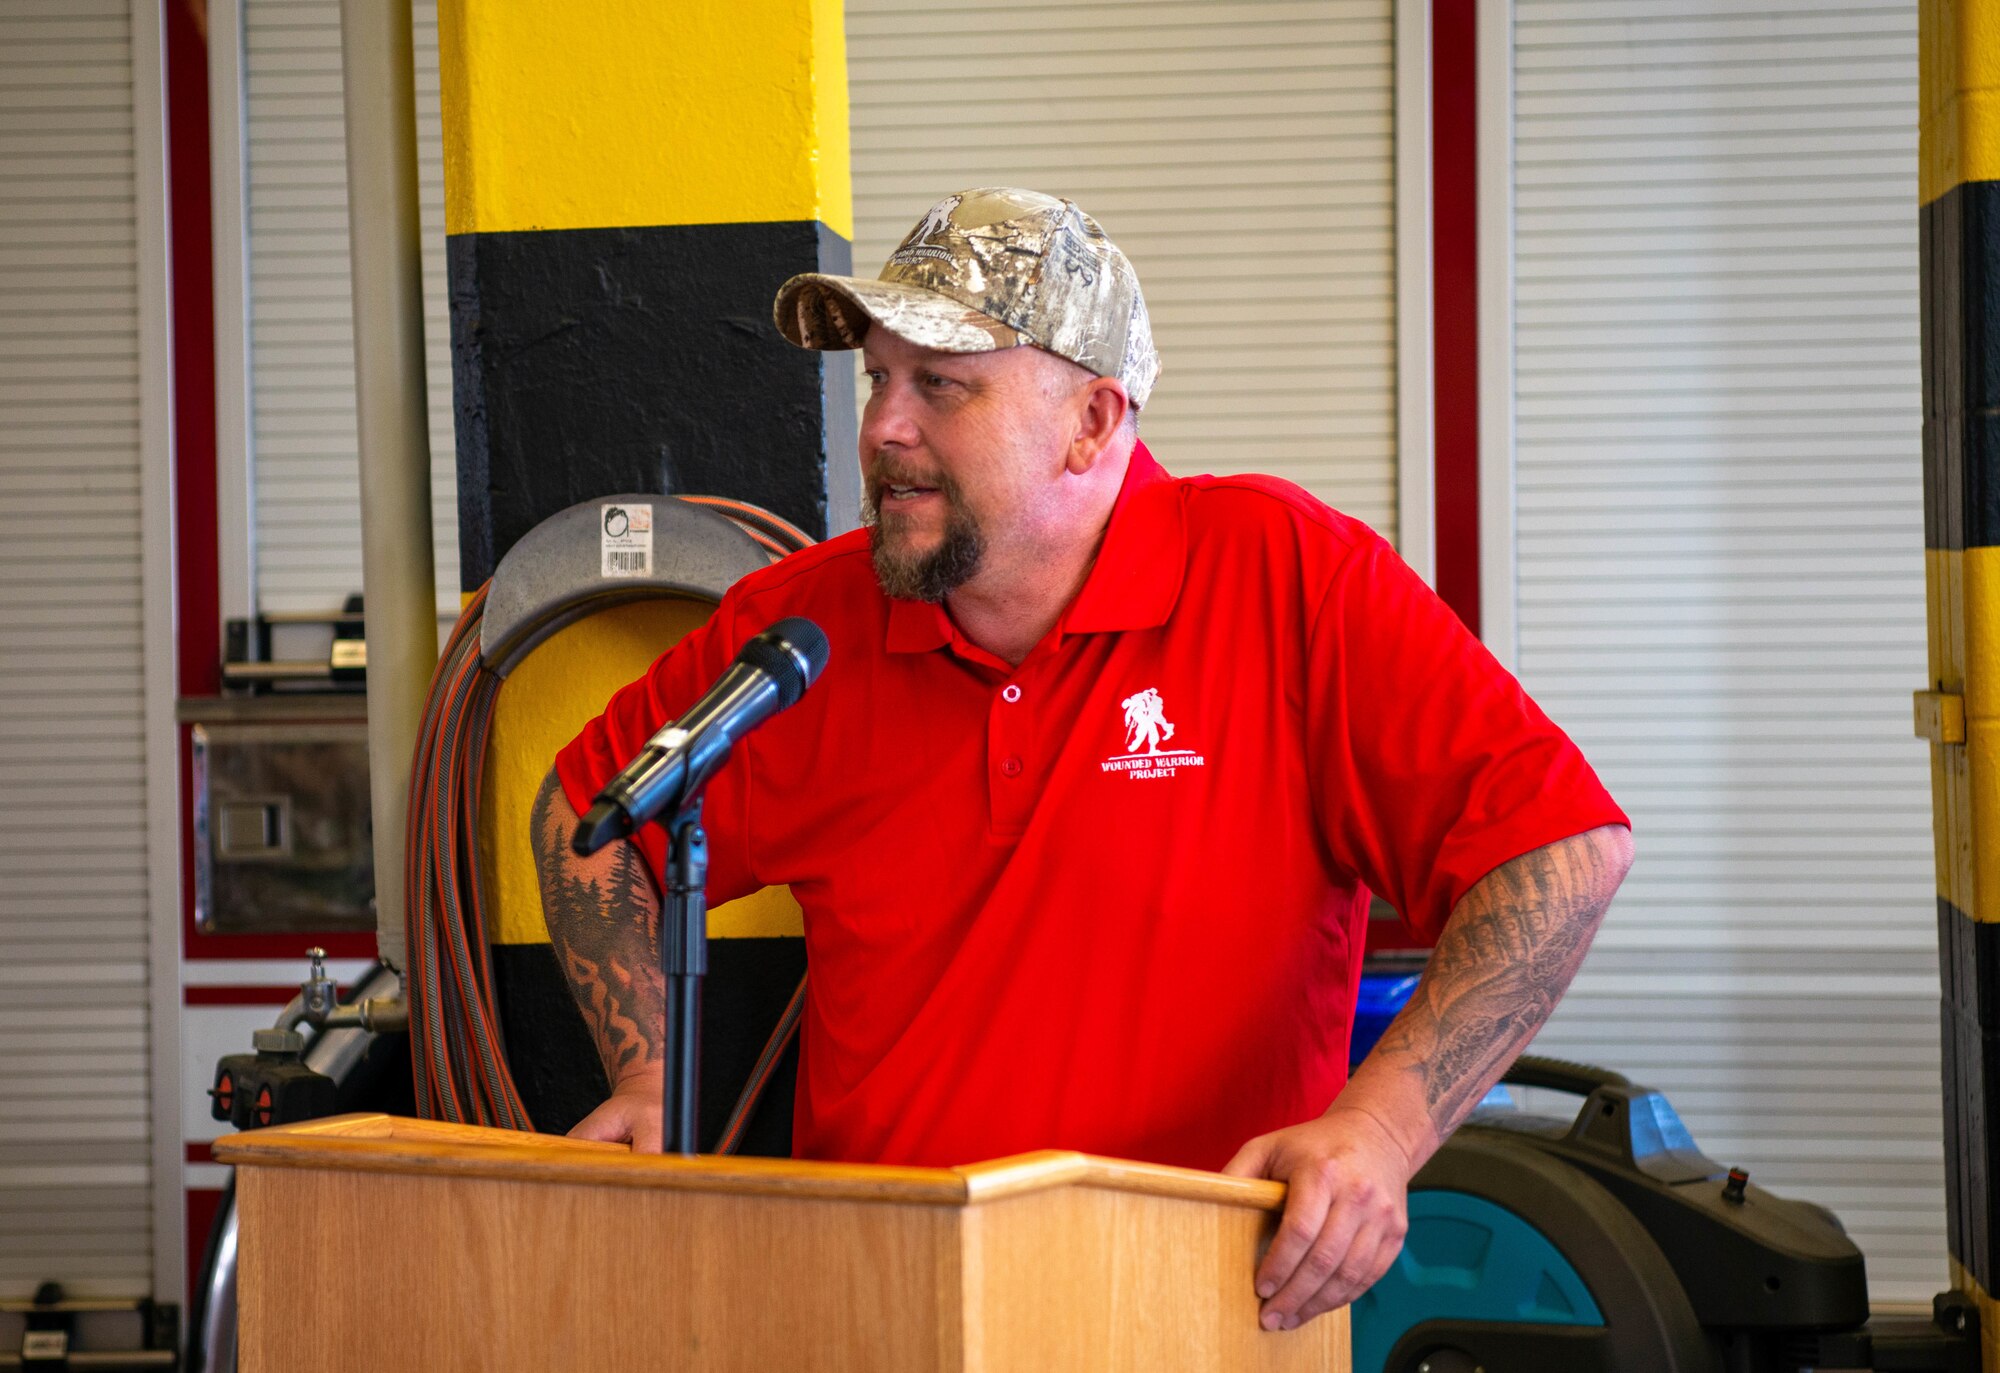 Brett Miller, former U.S. Army Guard firefighter, tells the audience about his time as a first responder during 9/11 during a ceremony at Ramstein Air Base, Germany, Sept. 9, 2022.